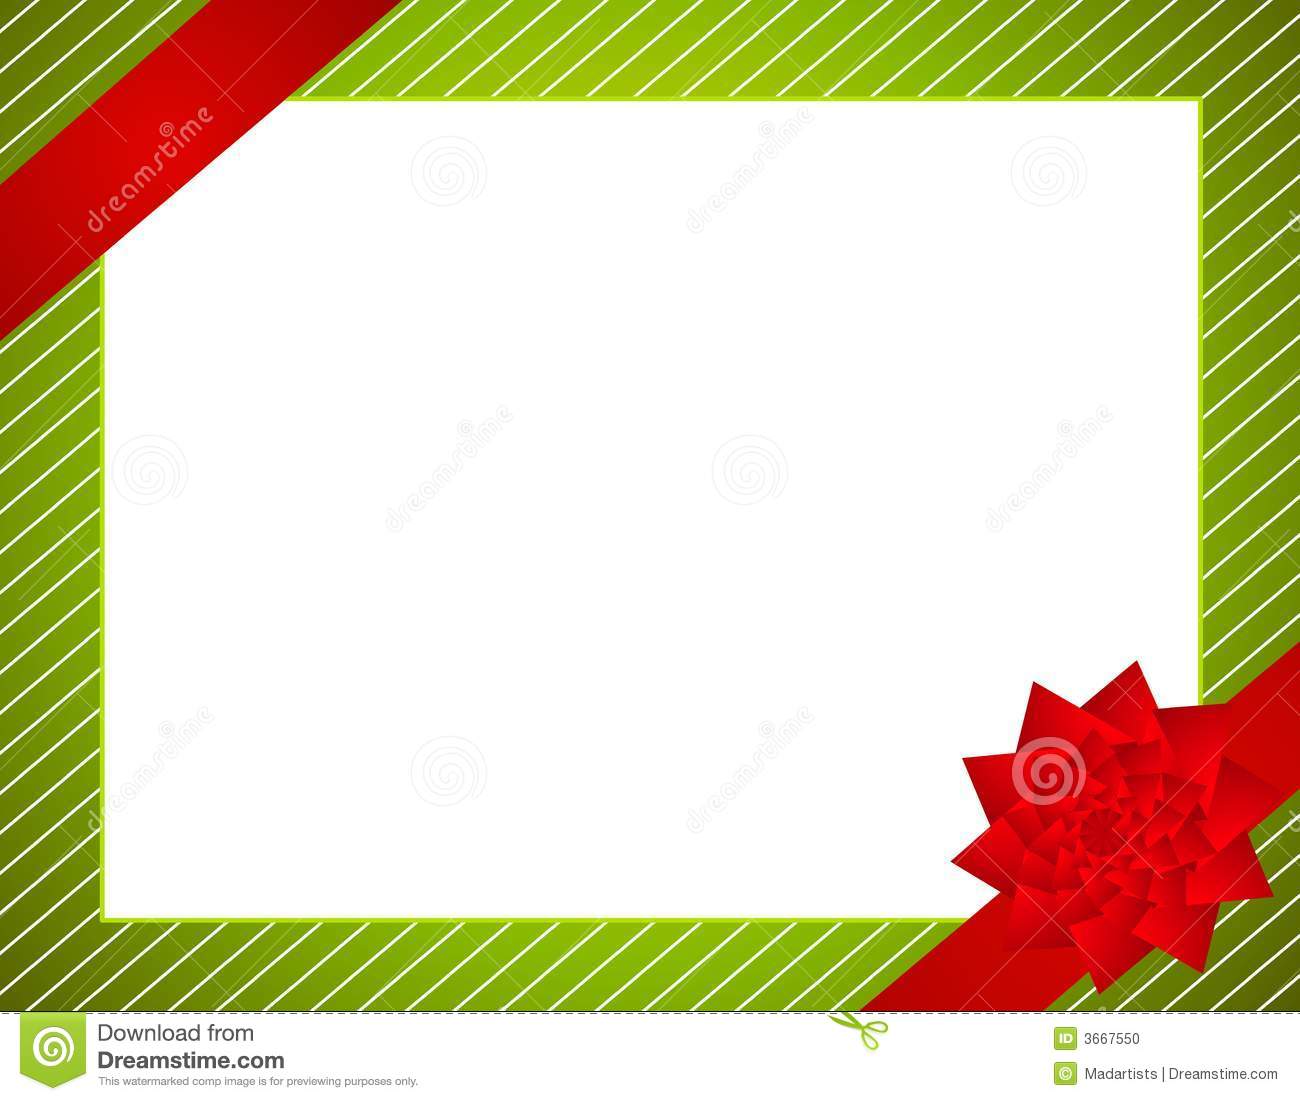 Background Border Illustration Featuring A Gift Wrapping Border With